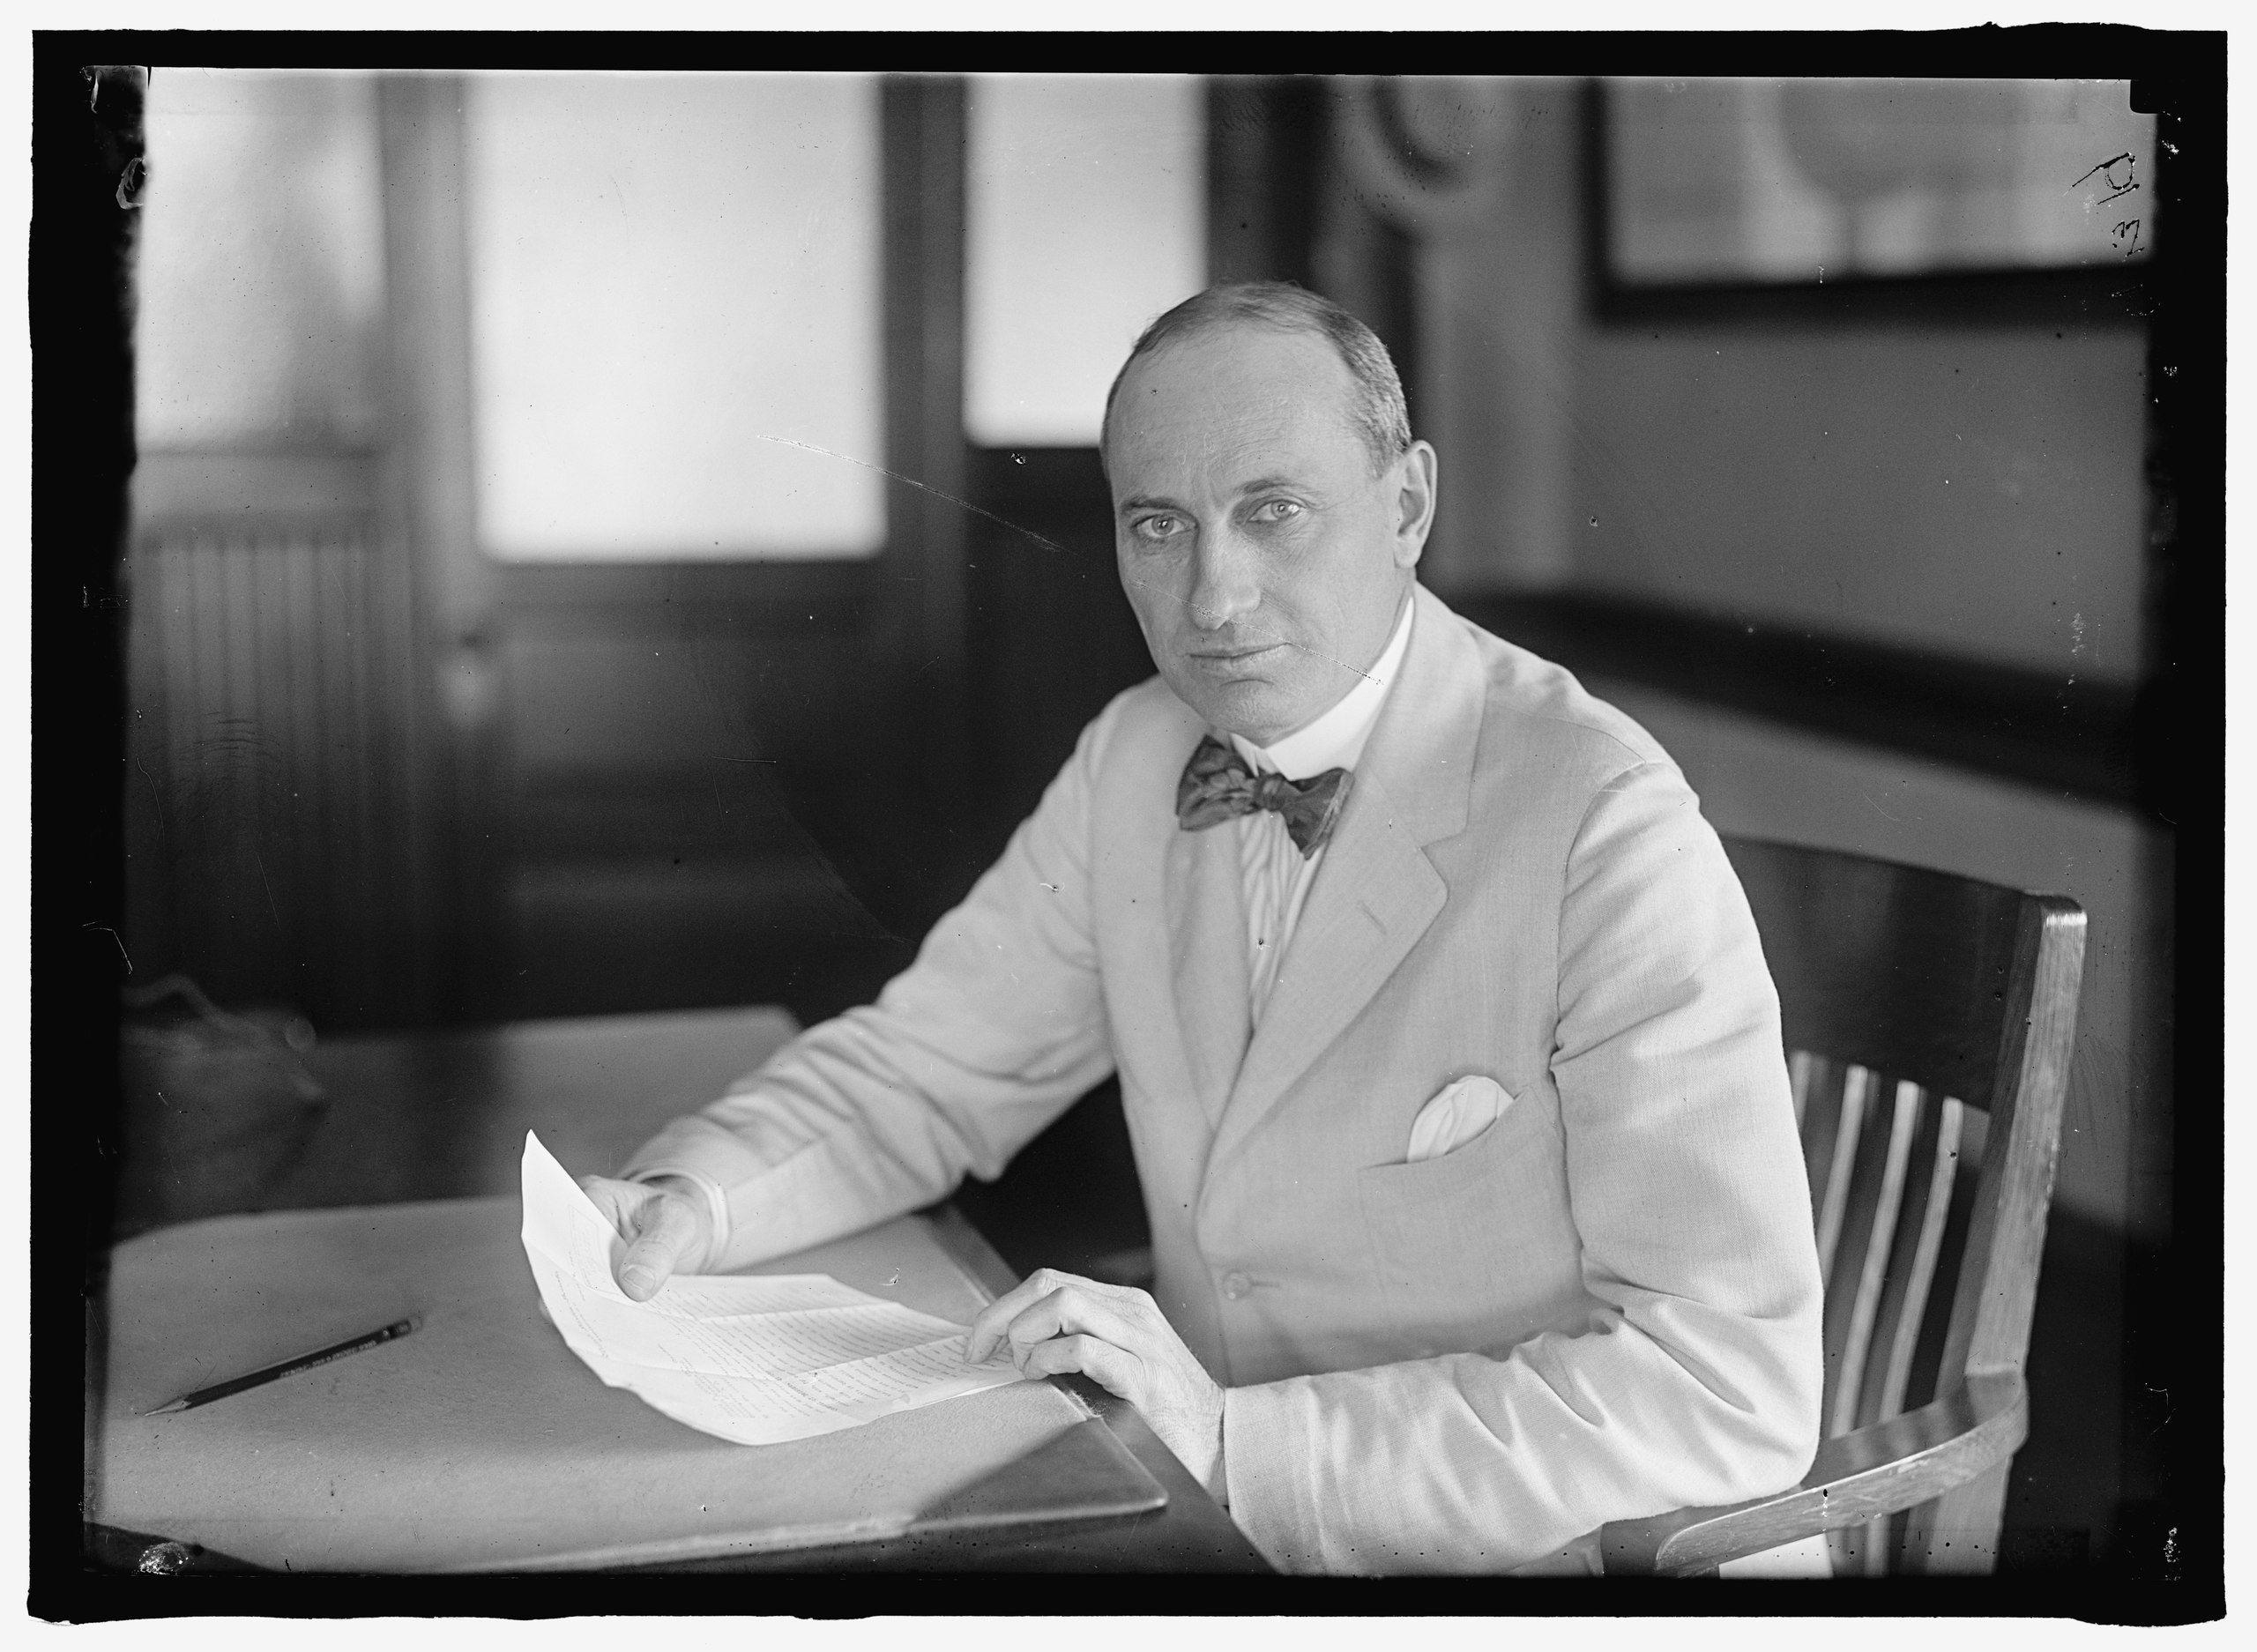 A man wearing a blazer and bow tie sitting a desk holding documents